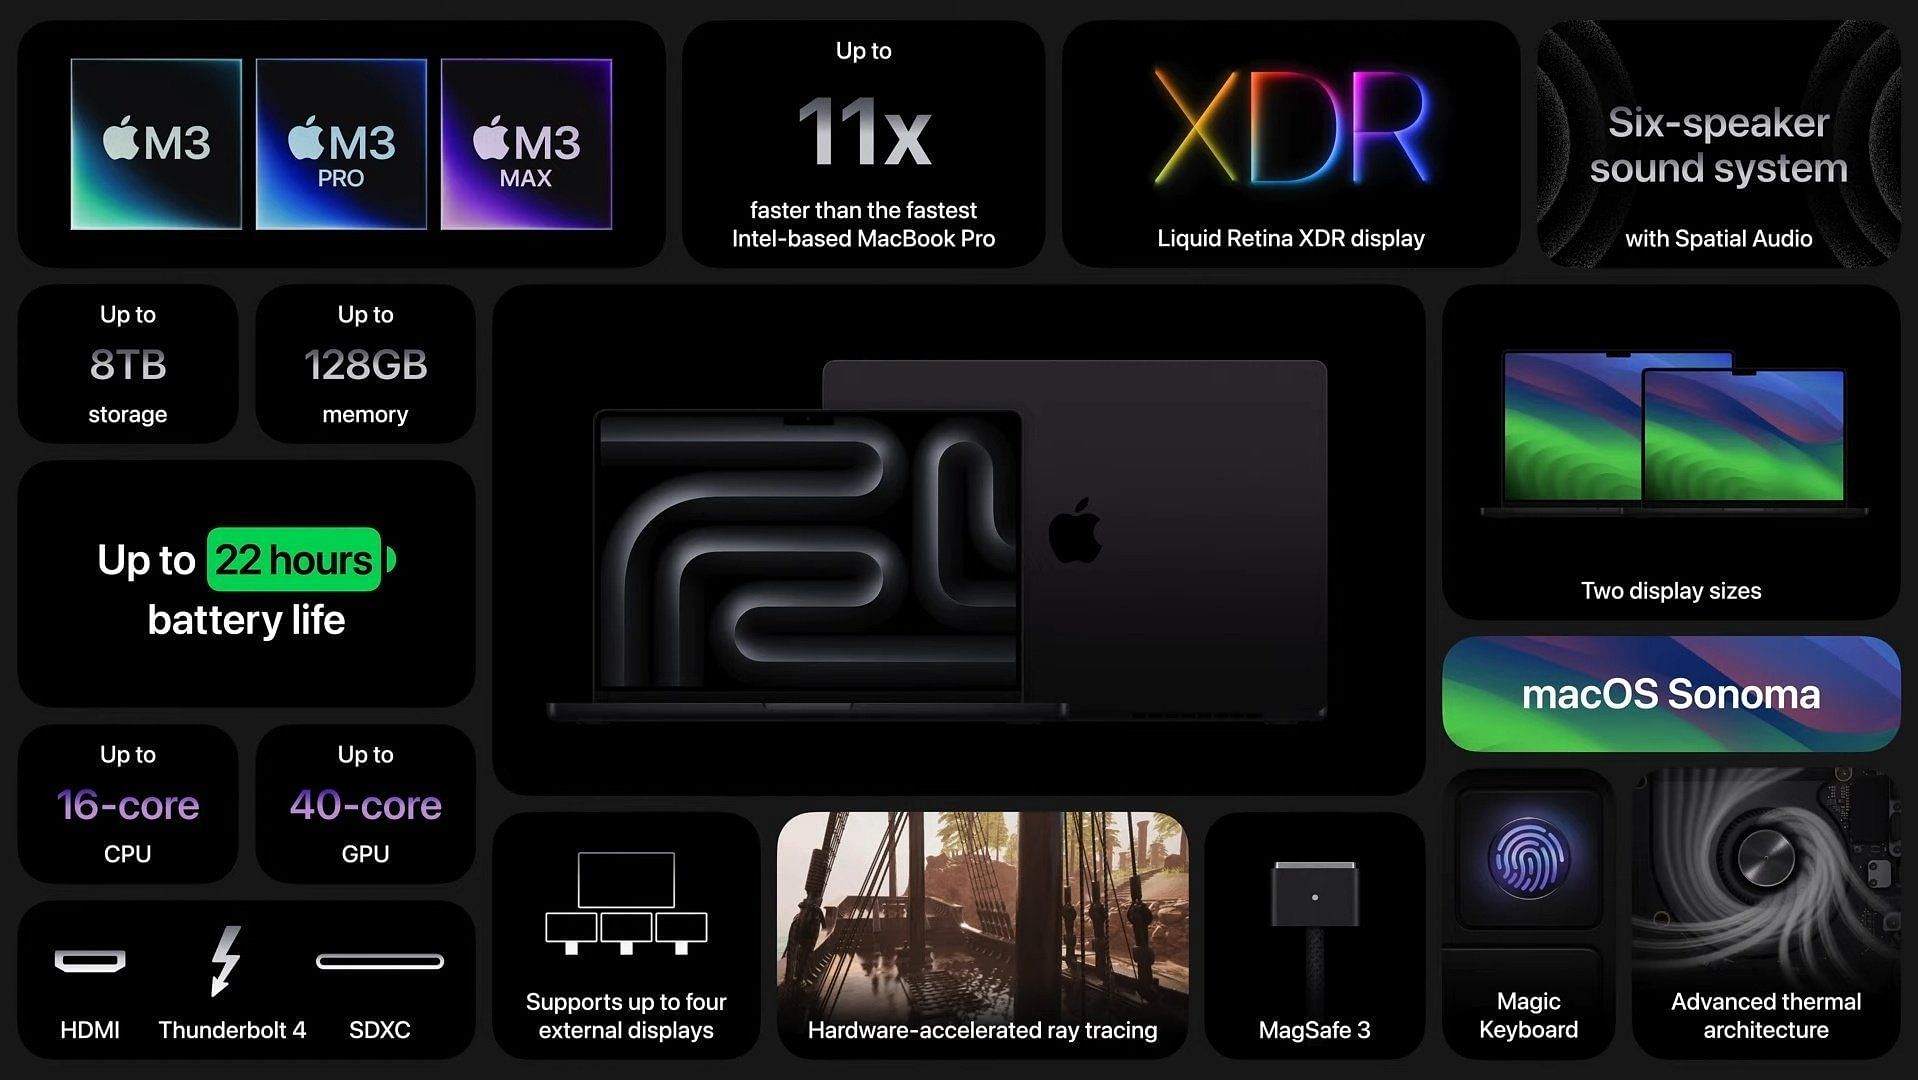 The detailed specifications of the MacBook Pro M3 (Image via Apple)